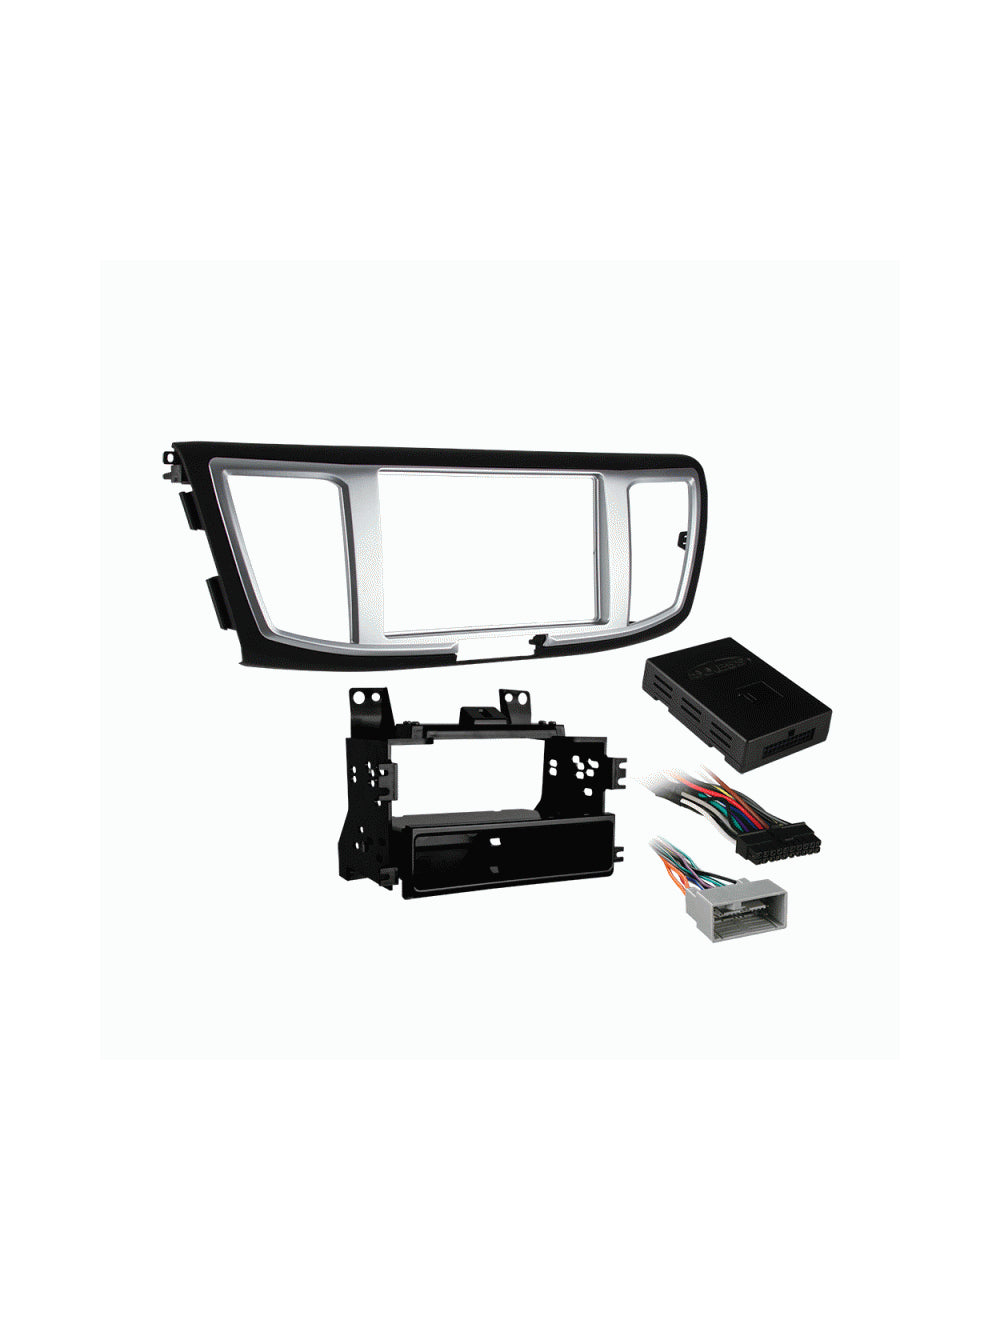 Metra 99-7804B Single/Double DIN Installation Kit with Display for Select 2013-Up Honda Accord Black